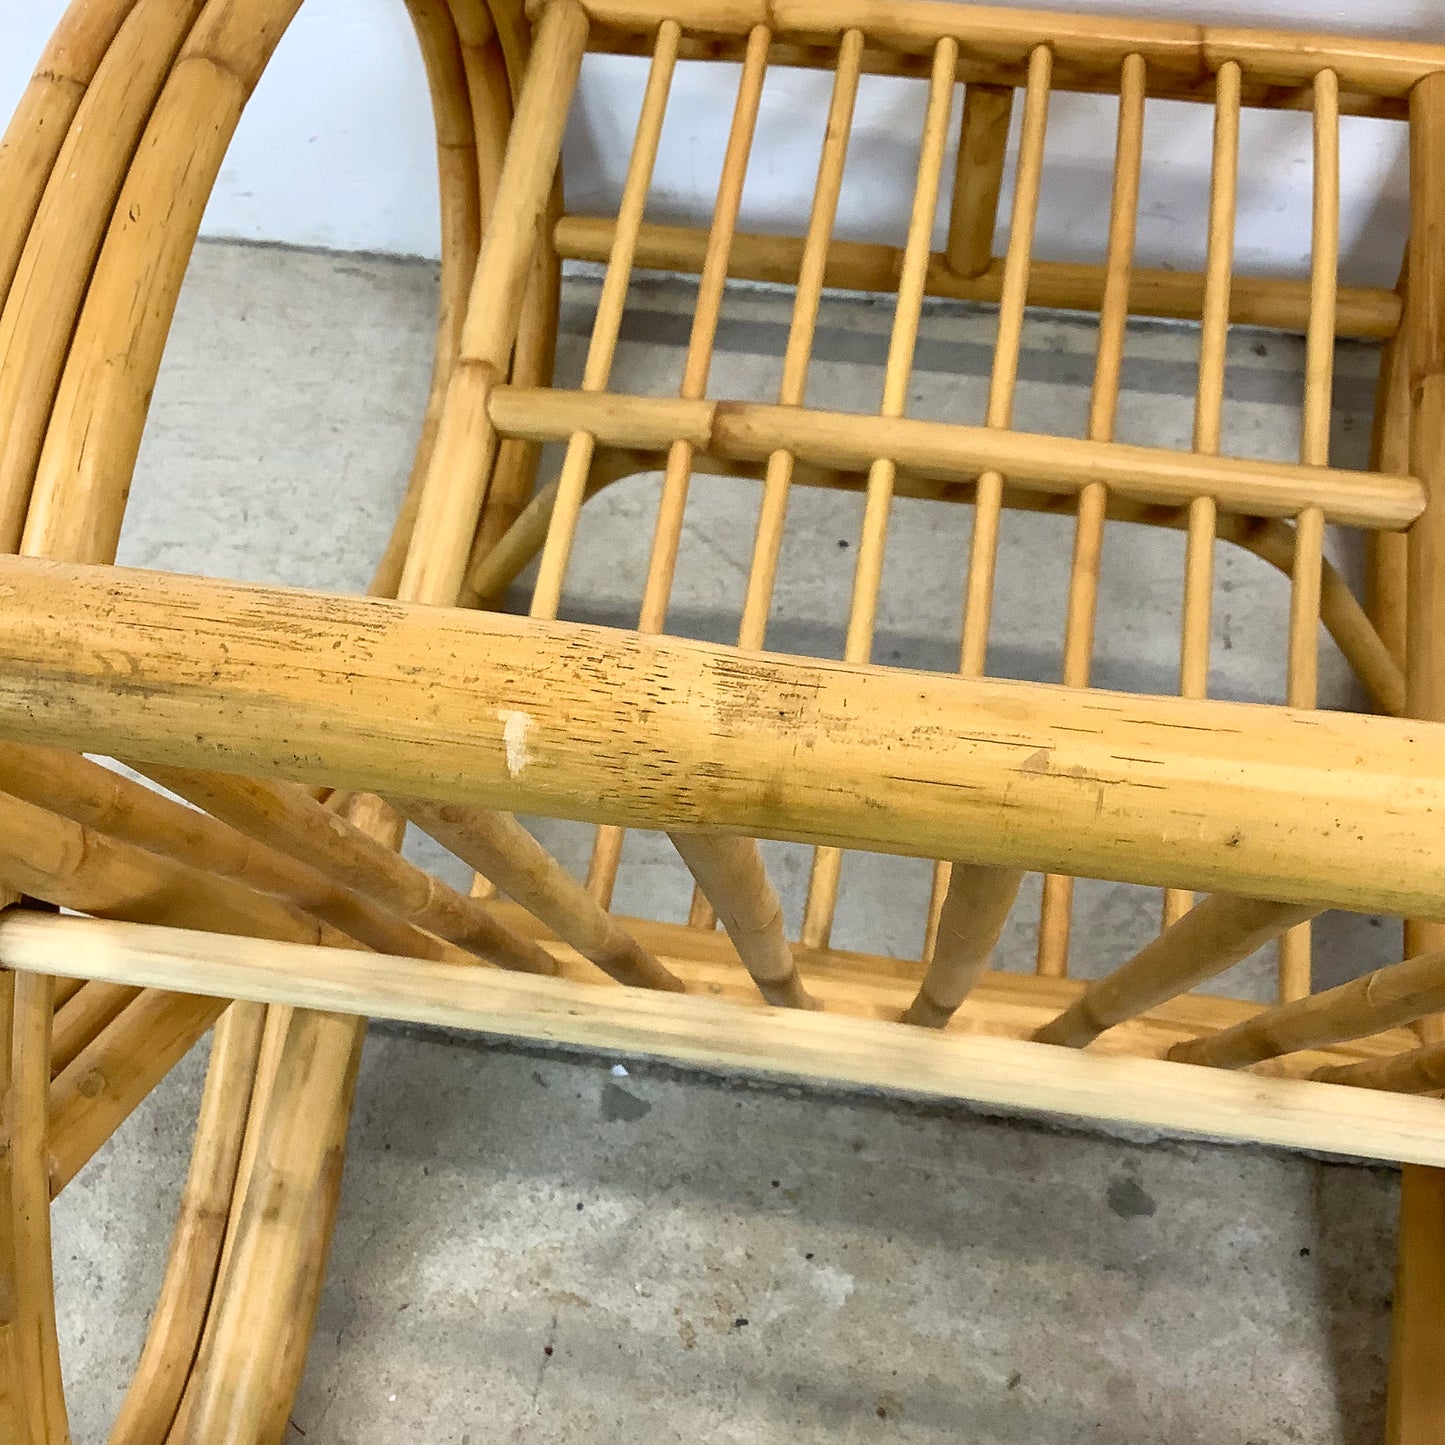 Vintage Bamboo Lounge Chair- Reclining